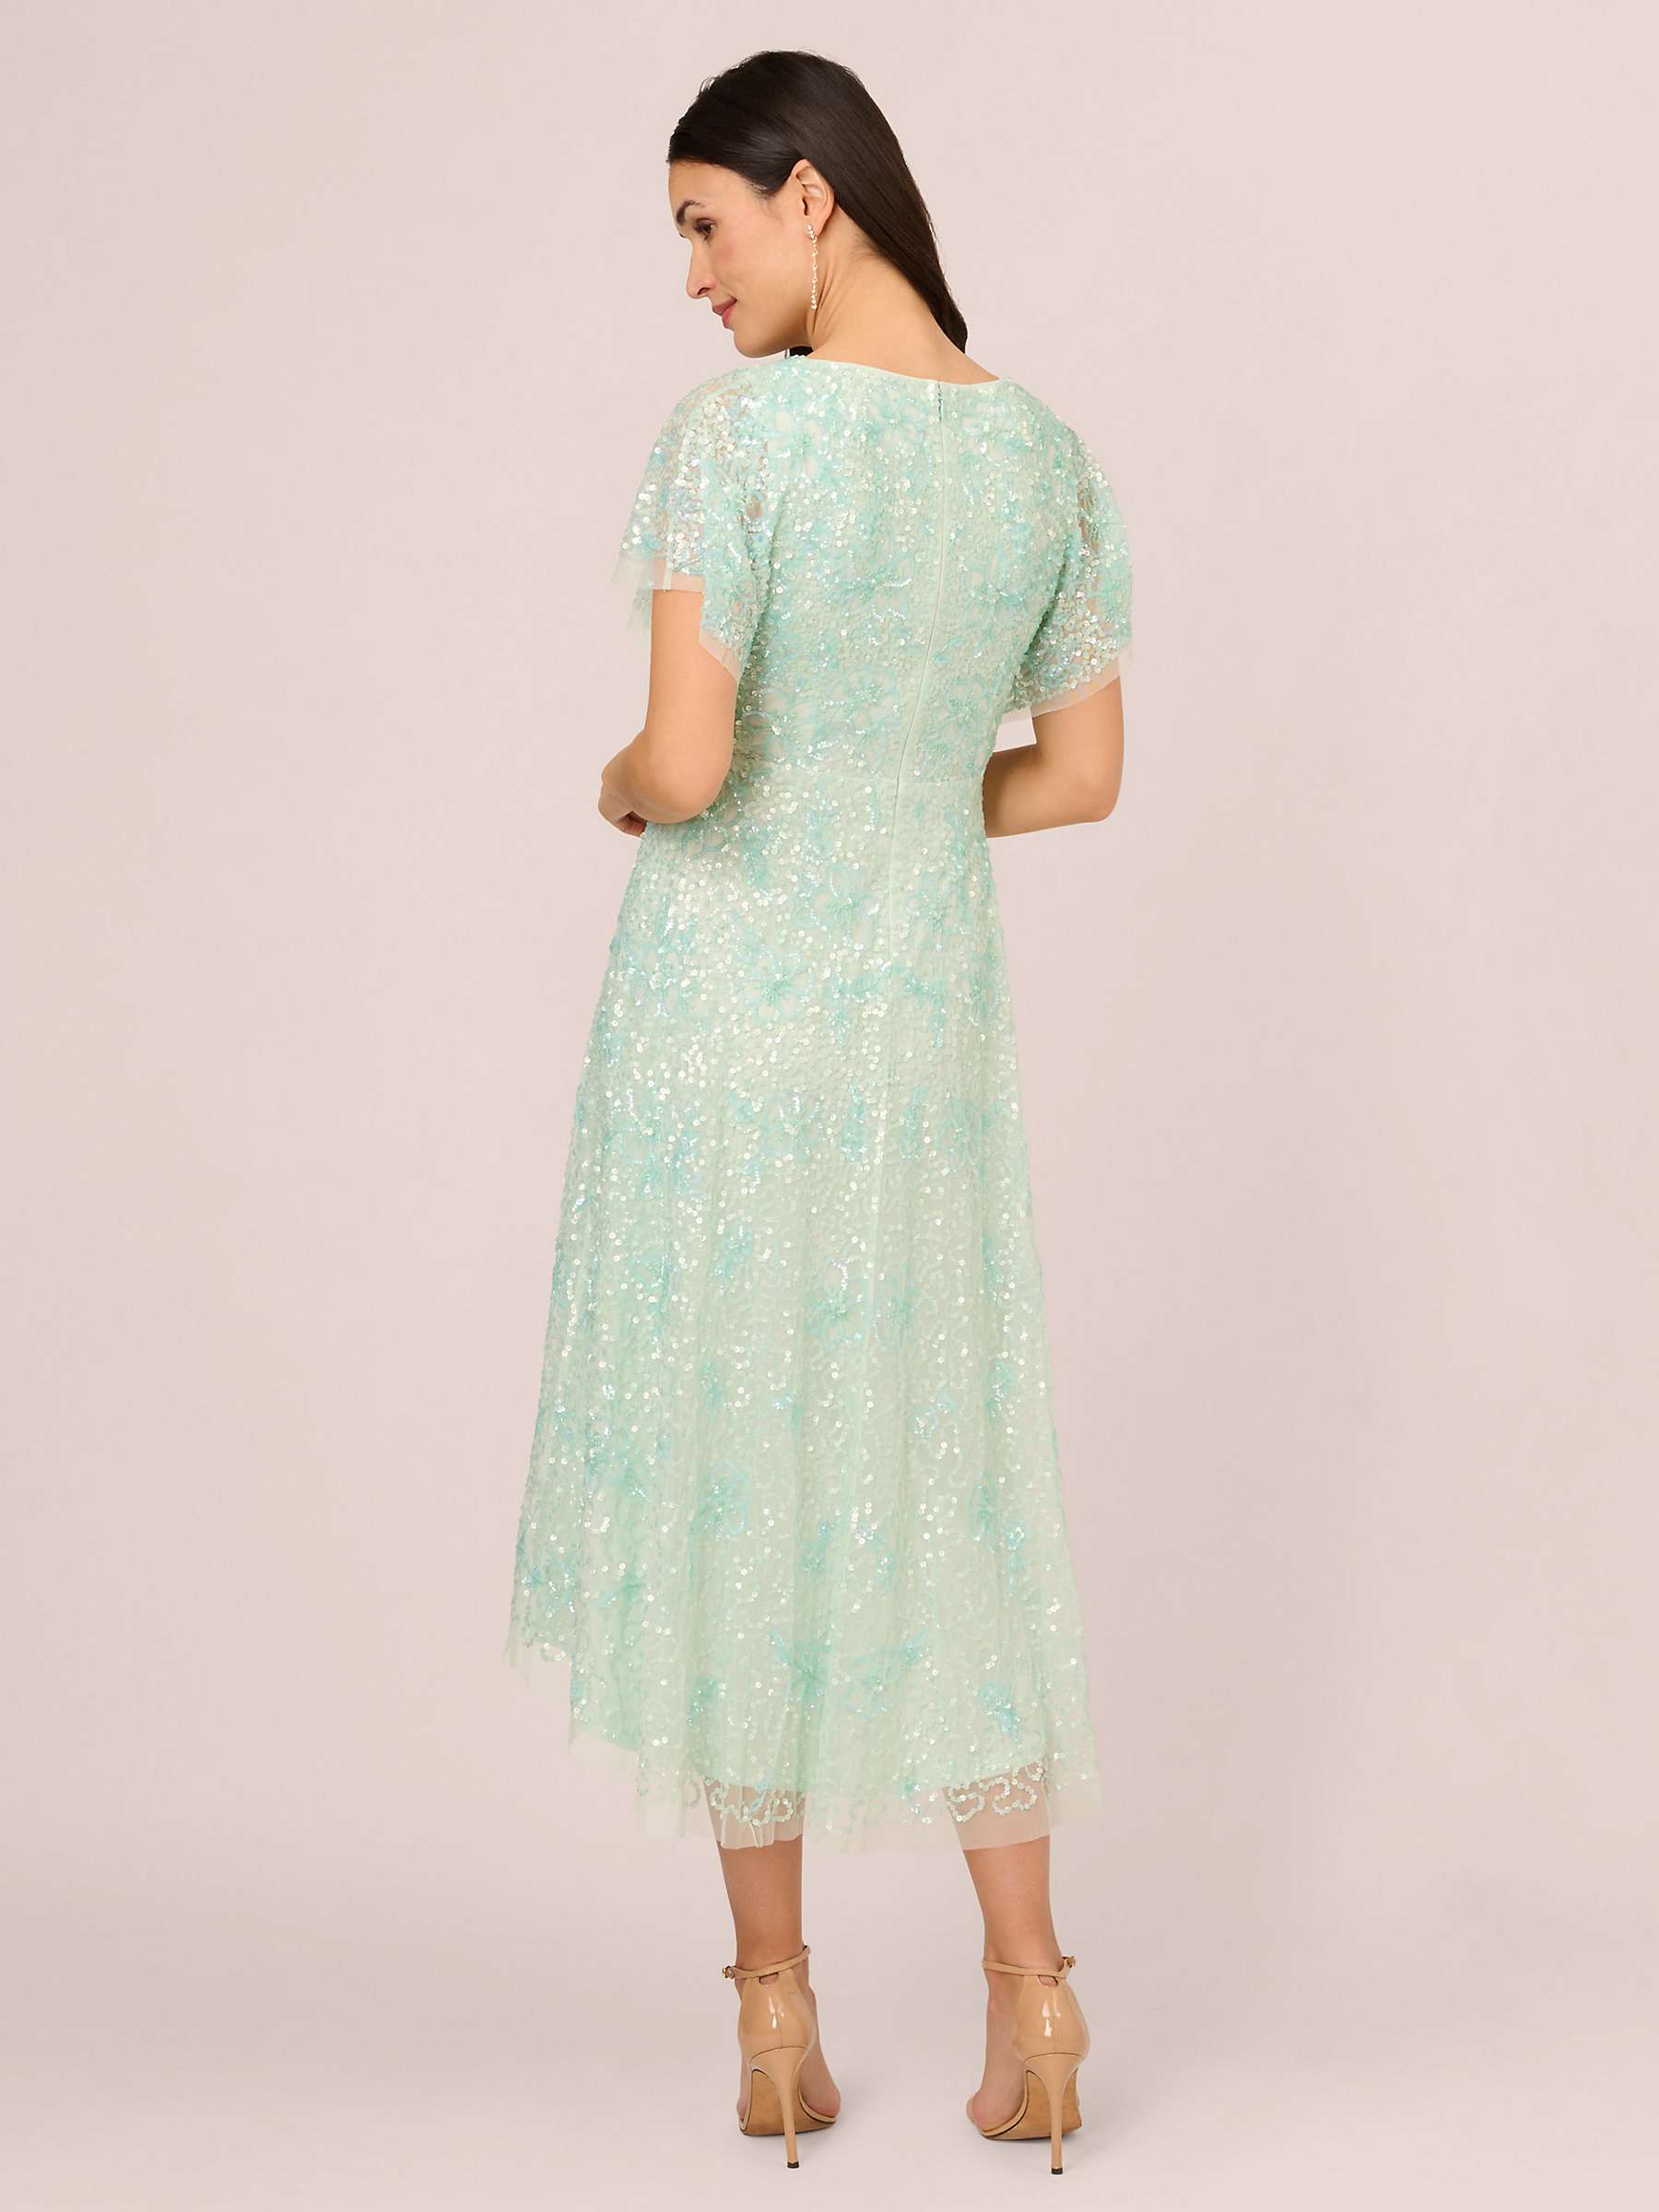 Buy Adrianna Papell Beaded Mesh Wrap Dress, Mint Glass Online at johnlewis.com